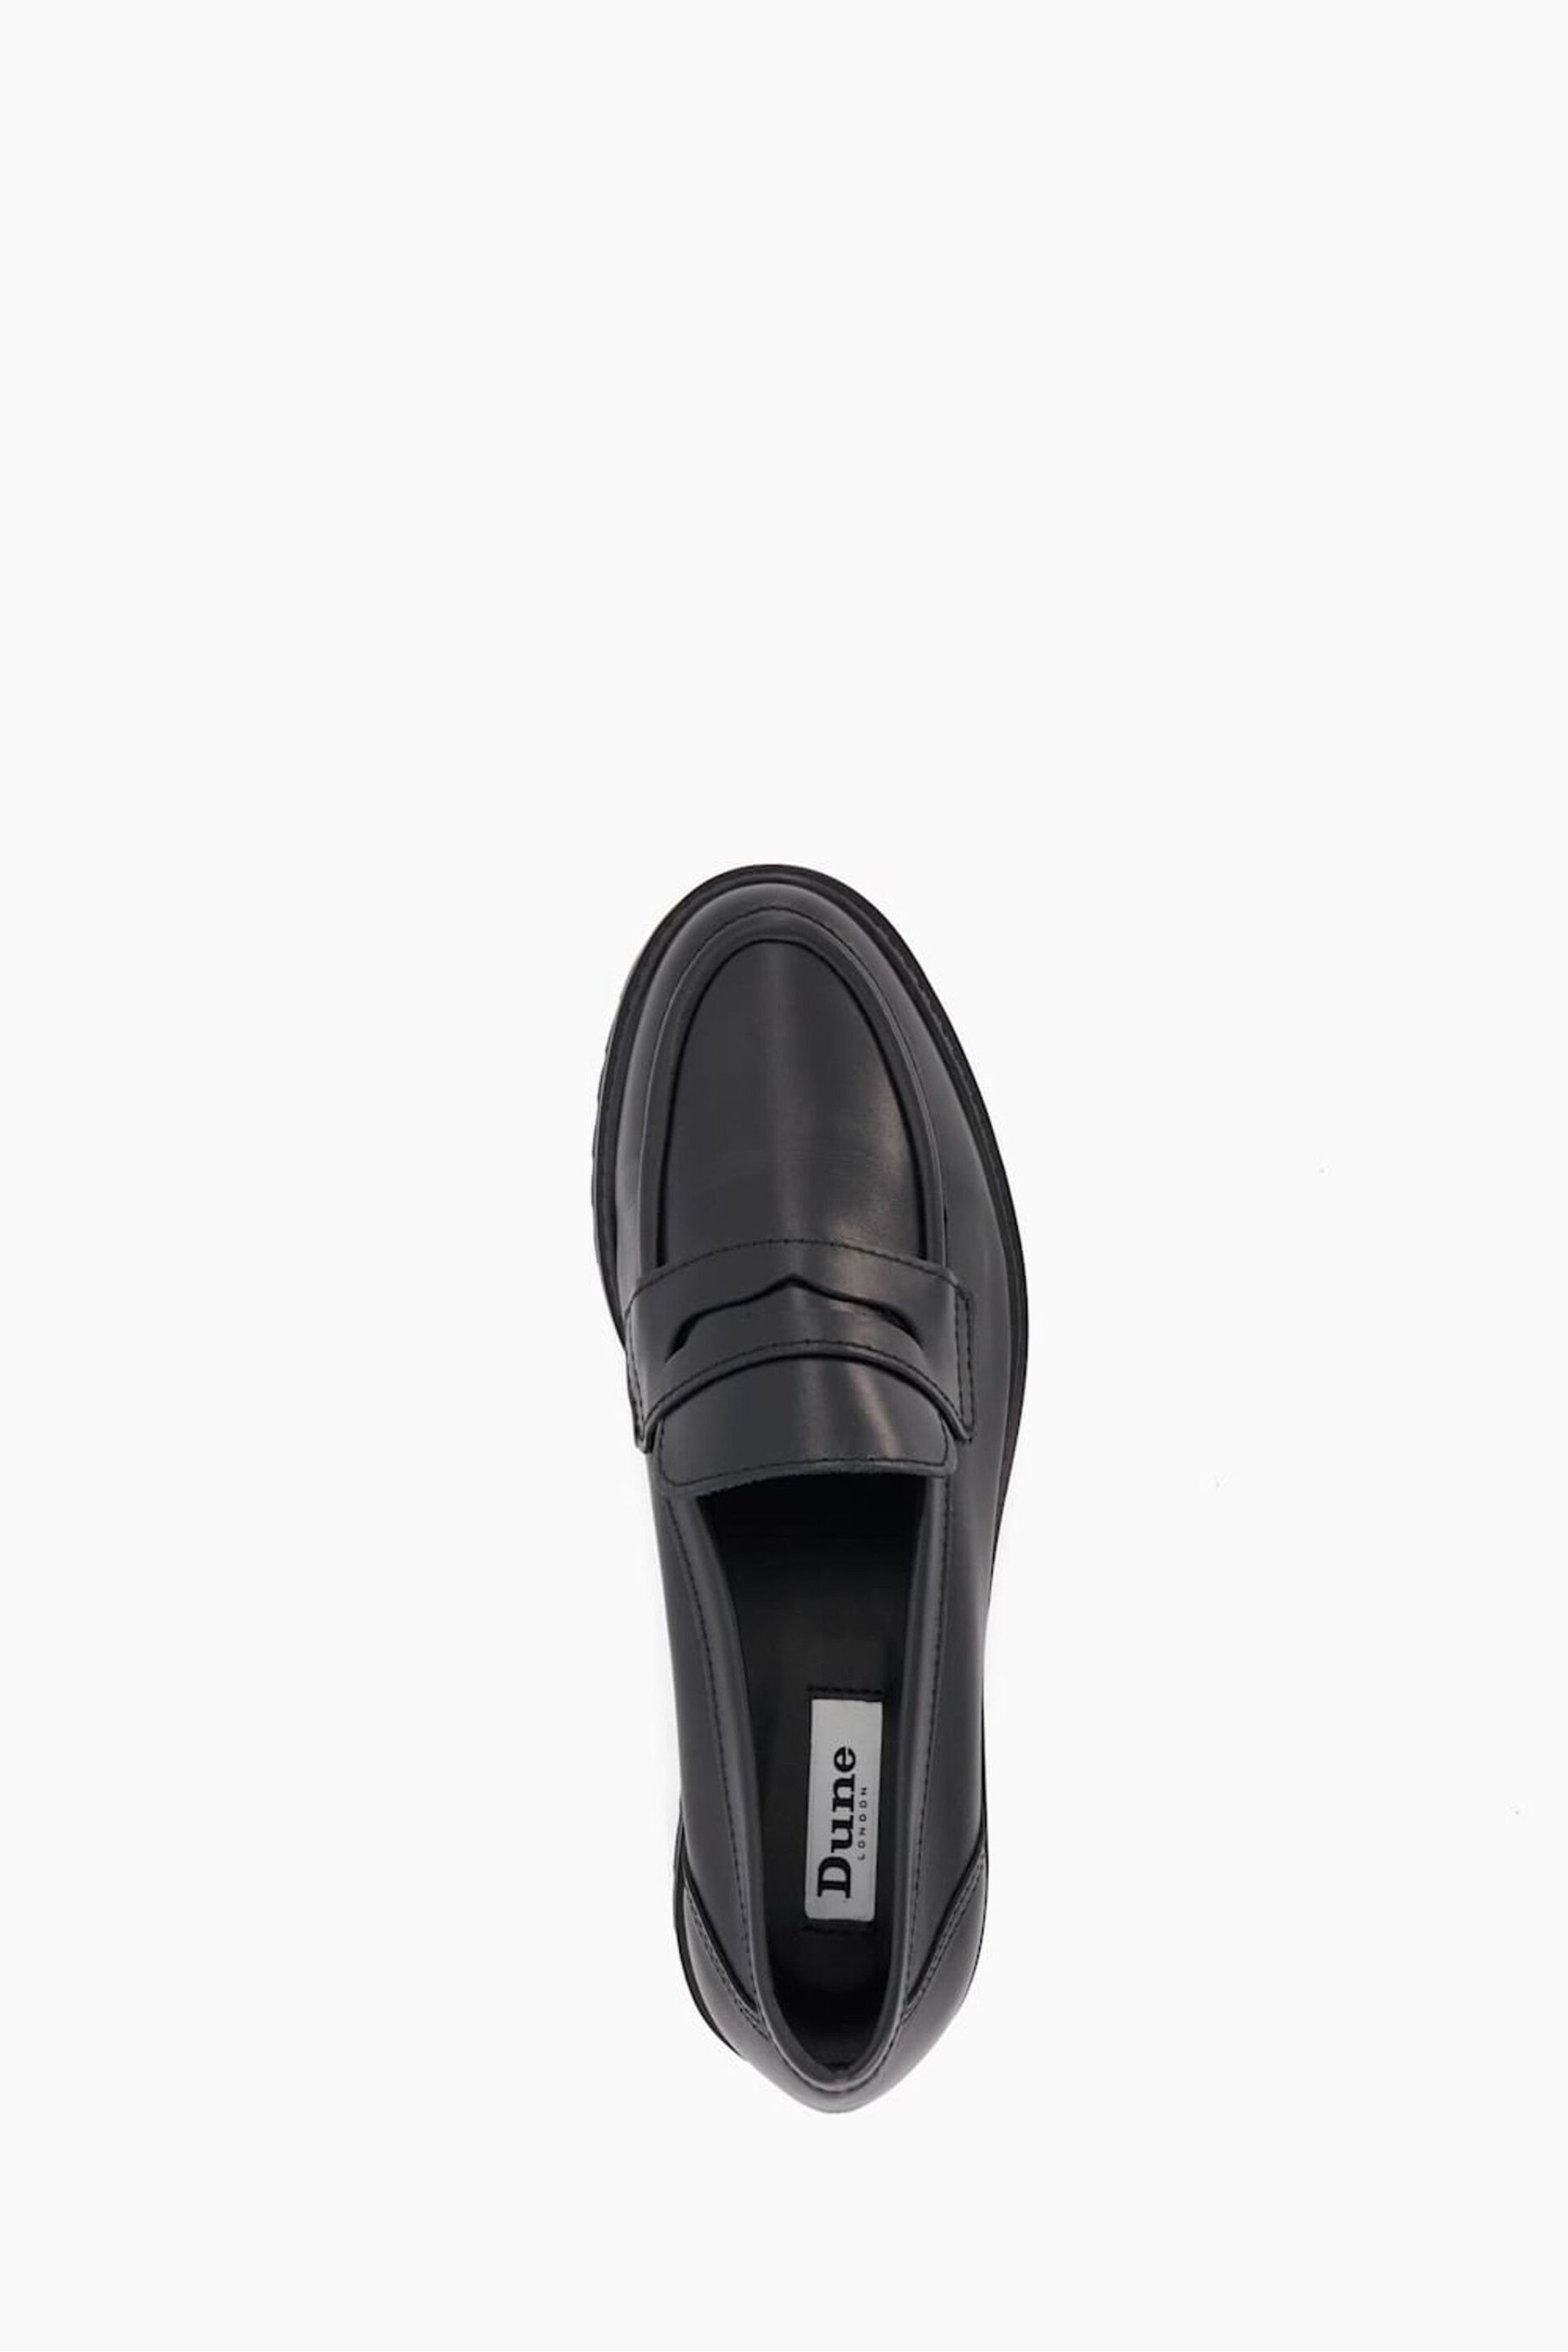 Dune London Black Gild Cleated Penny Loafers - Image 4 of 6